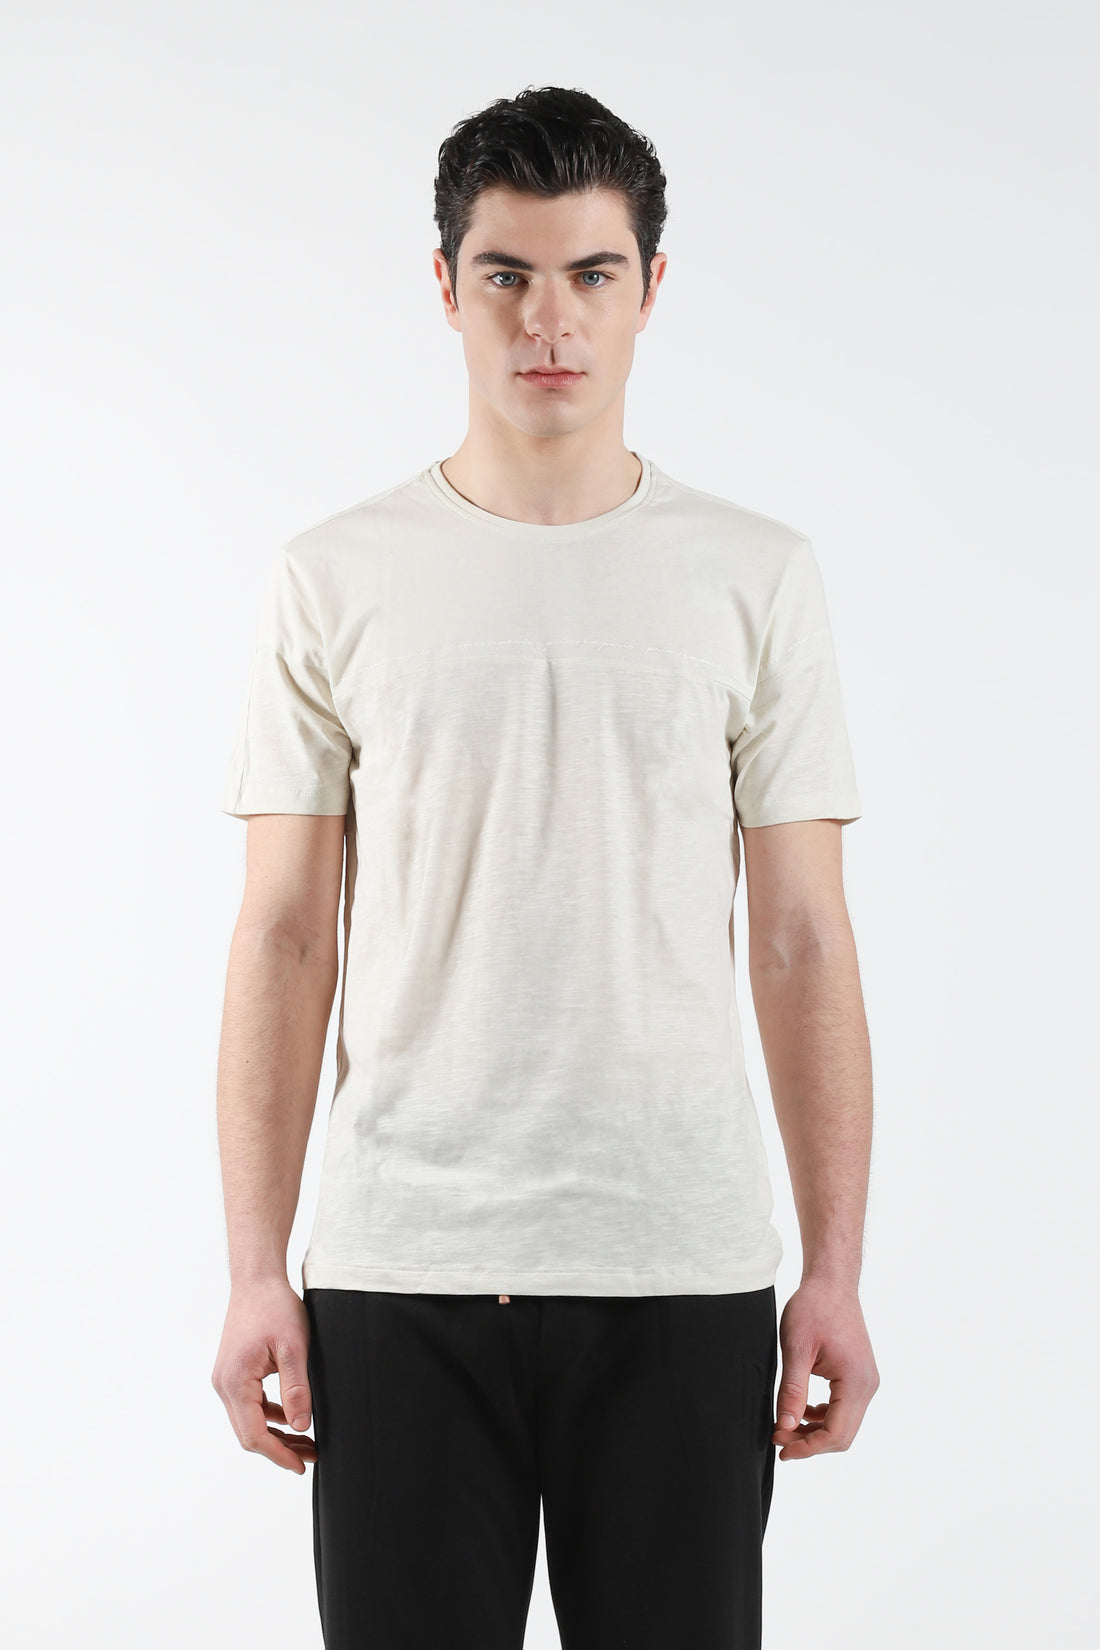 Round neck T-Shirt with color on color print - Beige